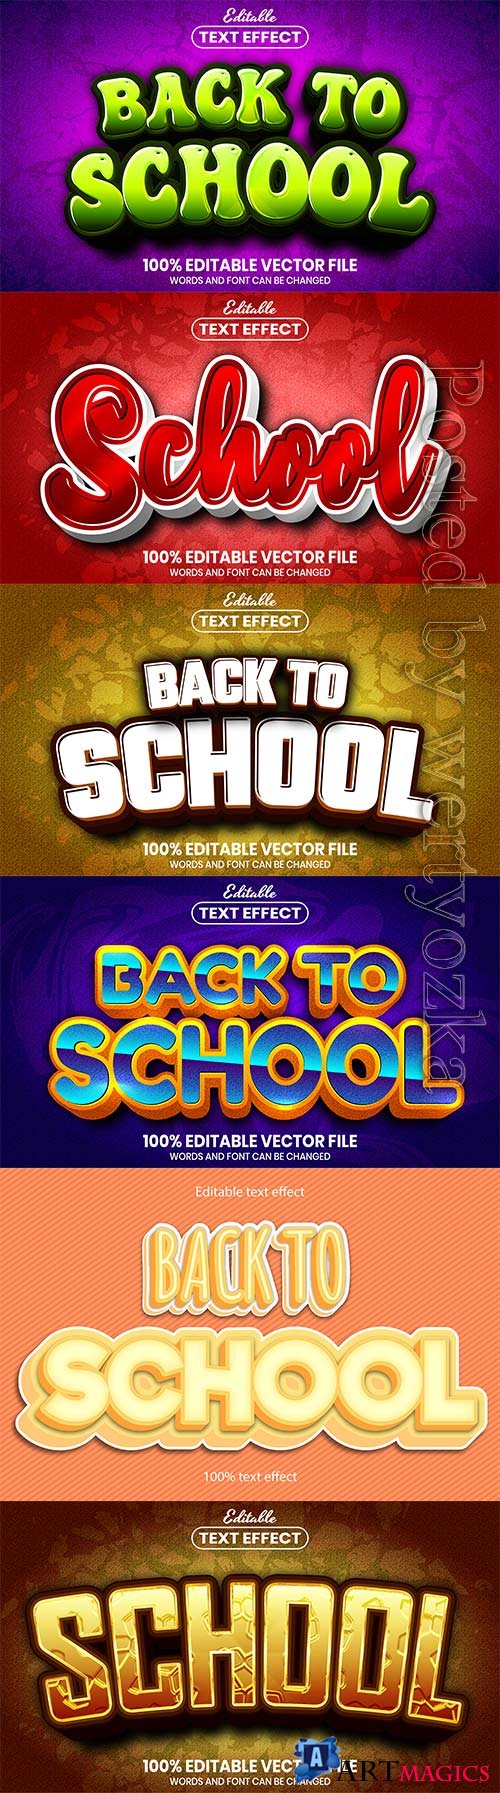 Back to school editable text effect vol 6